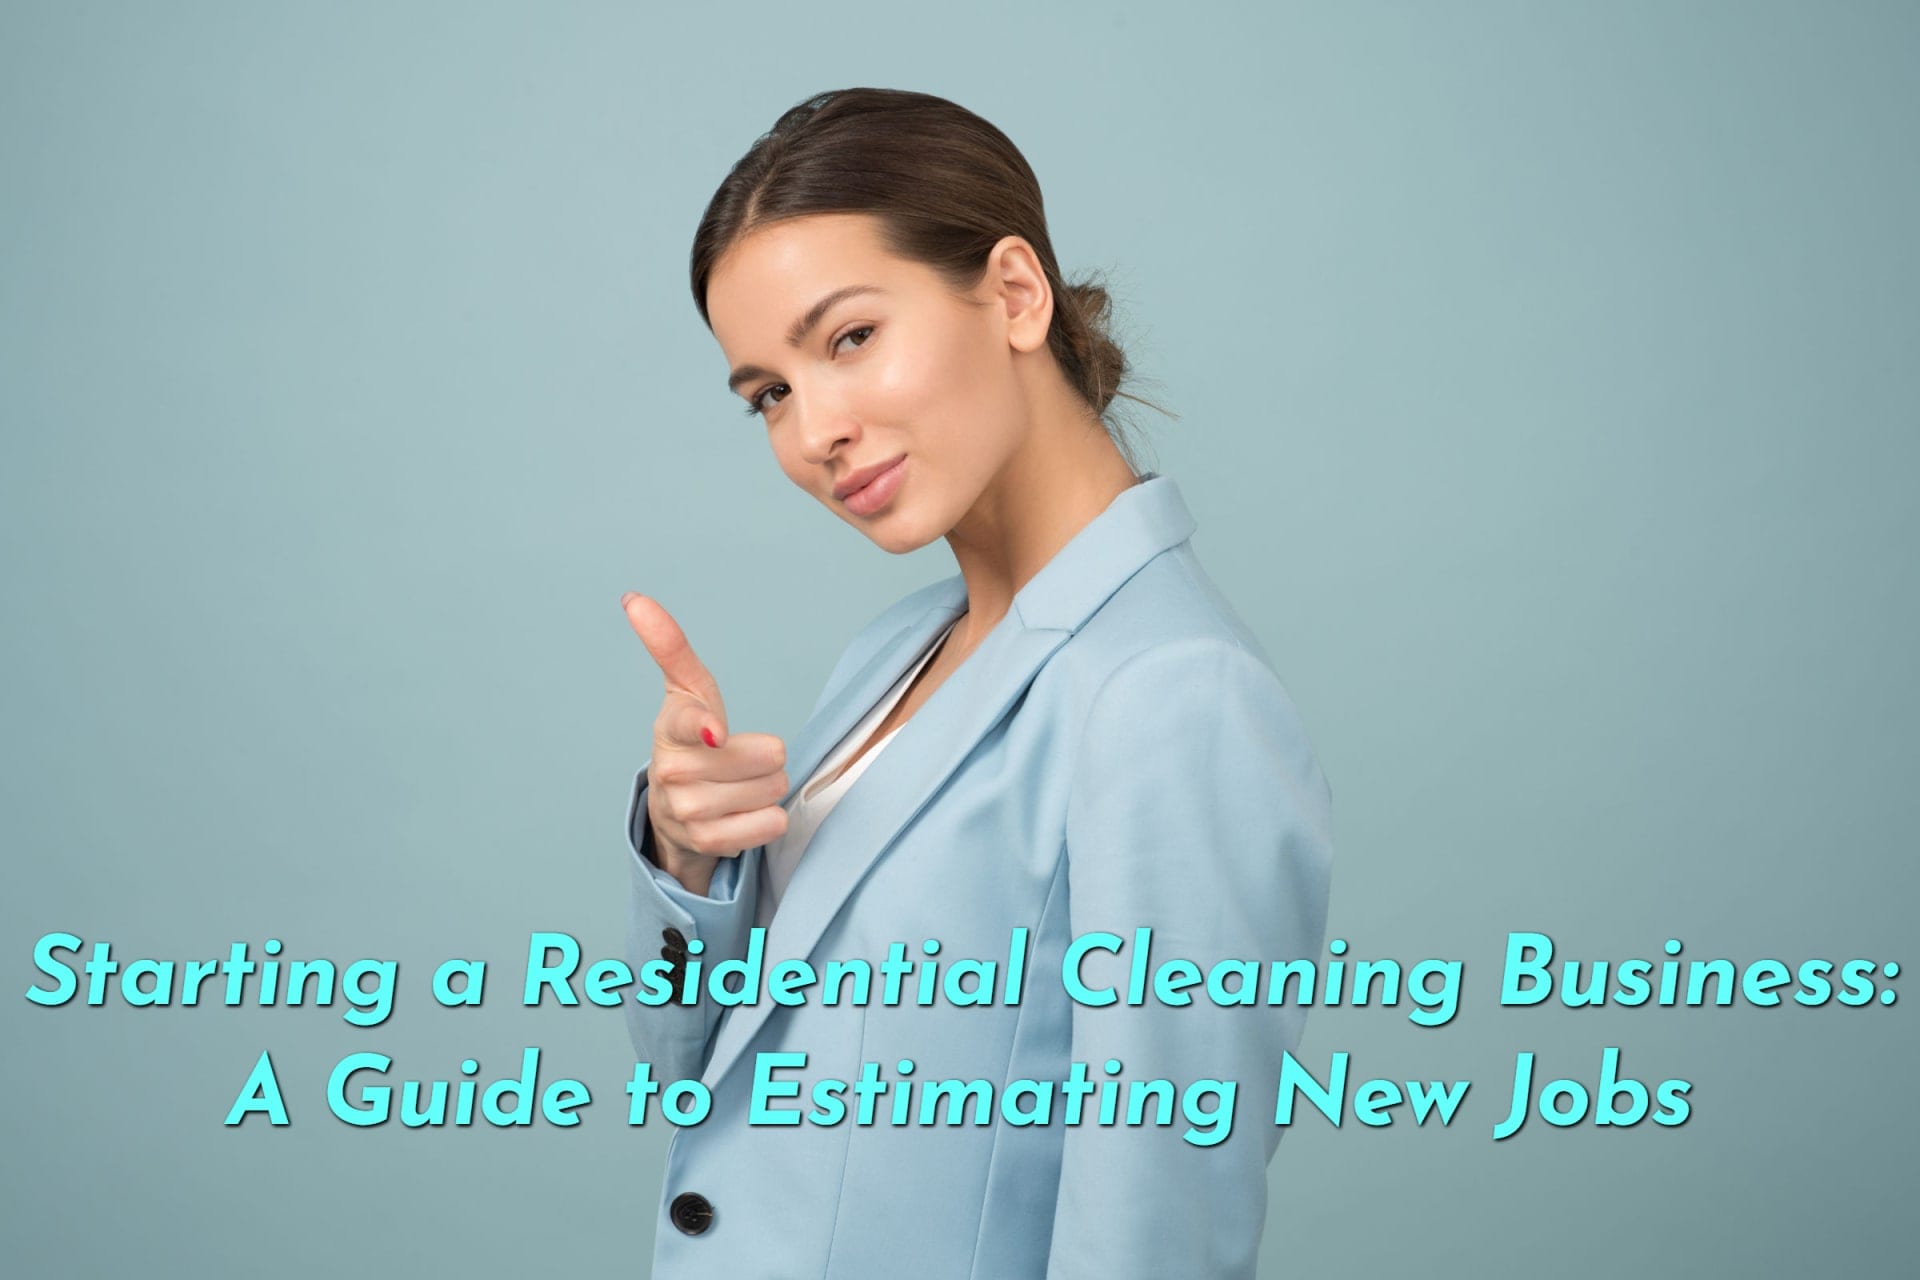 A business woman who is happy because she is starting a residential cleaning business